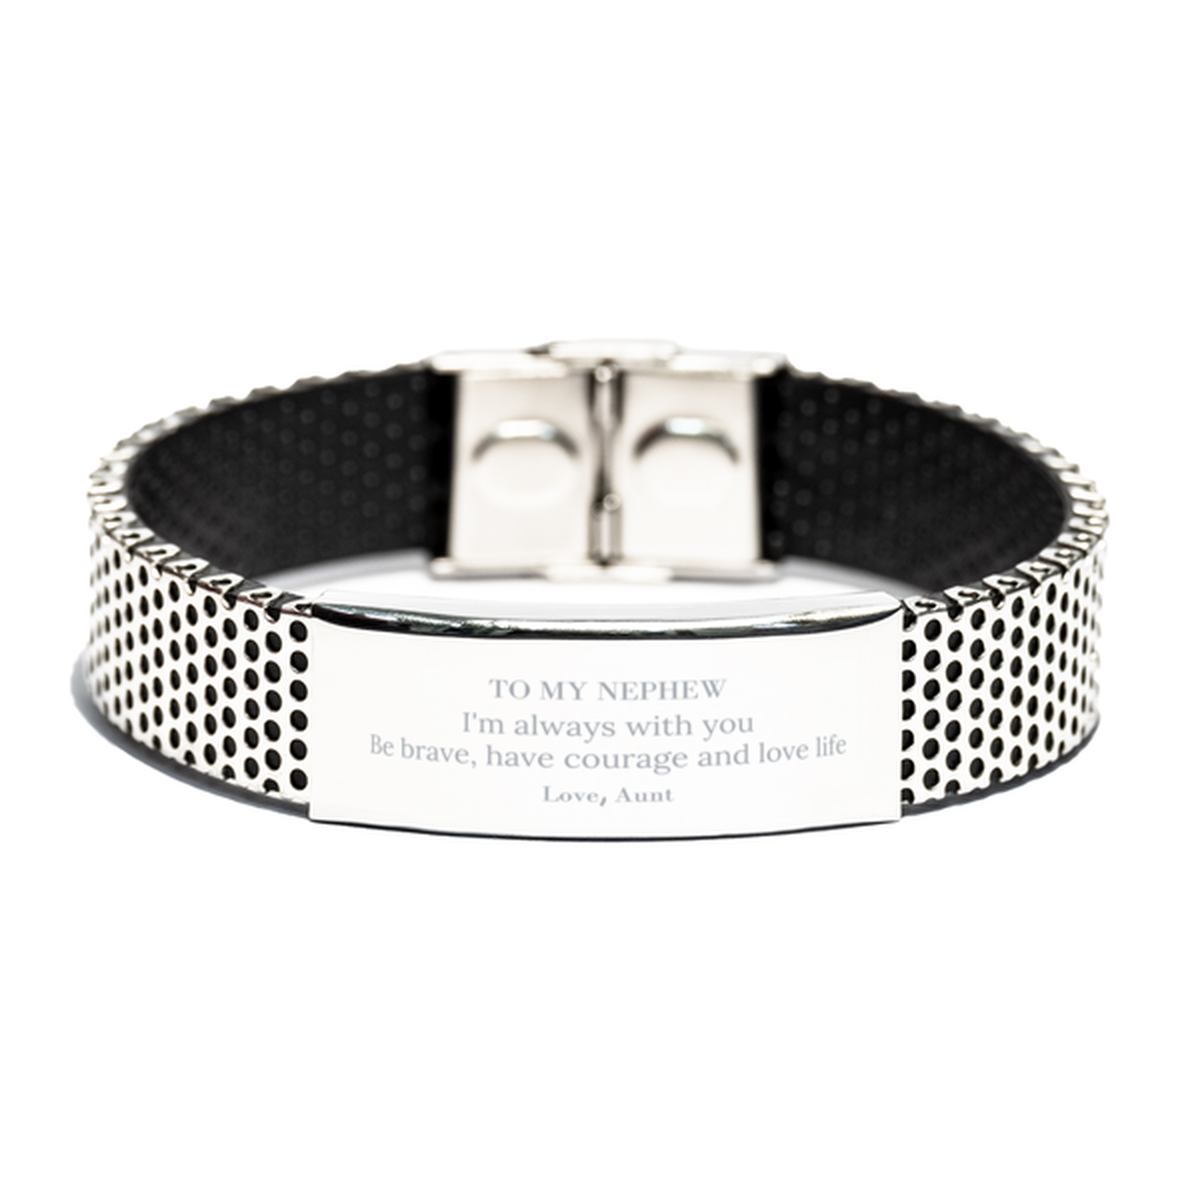 To My Nephew Gifts from Aunt, Unique Stainless Steel Bracelet Inspirational Christmas Birthday Graduation Gifts for Nephew I'm always with you. Be brave, have courage and love life. Love, Aunt